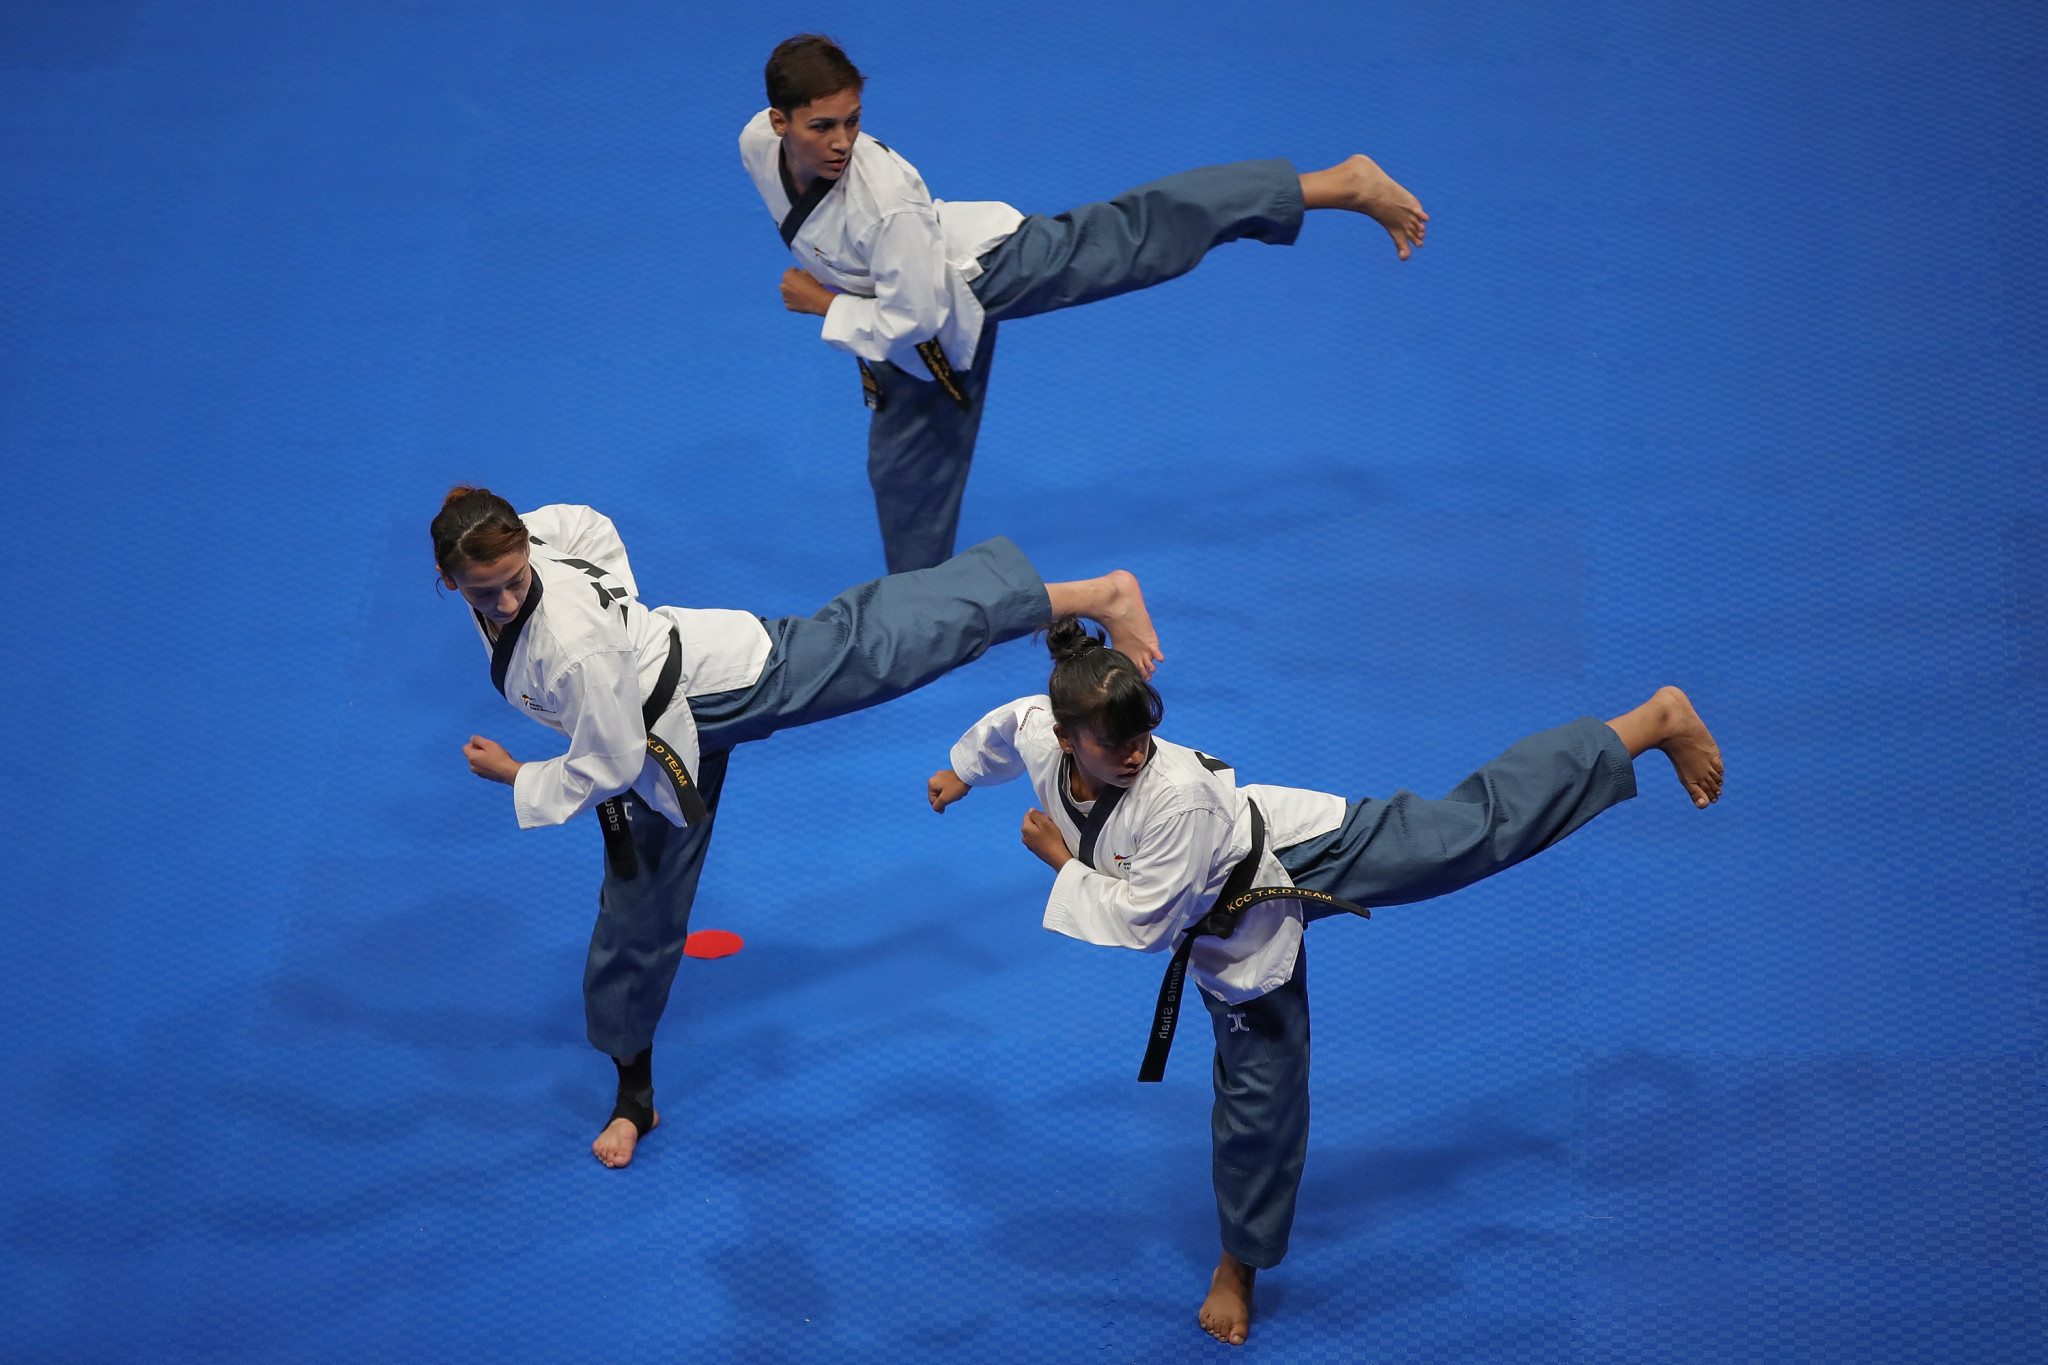 Record 62 countries on entry list for World Taekwondo Poomsae Championships